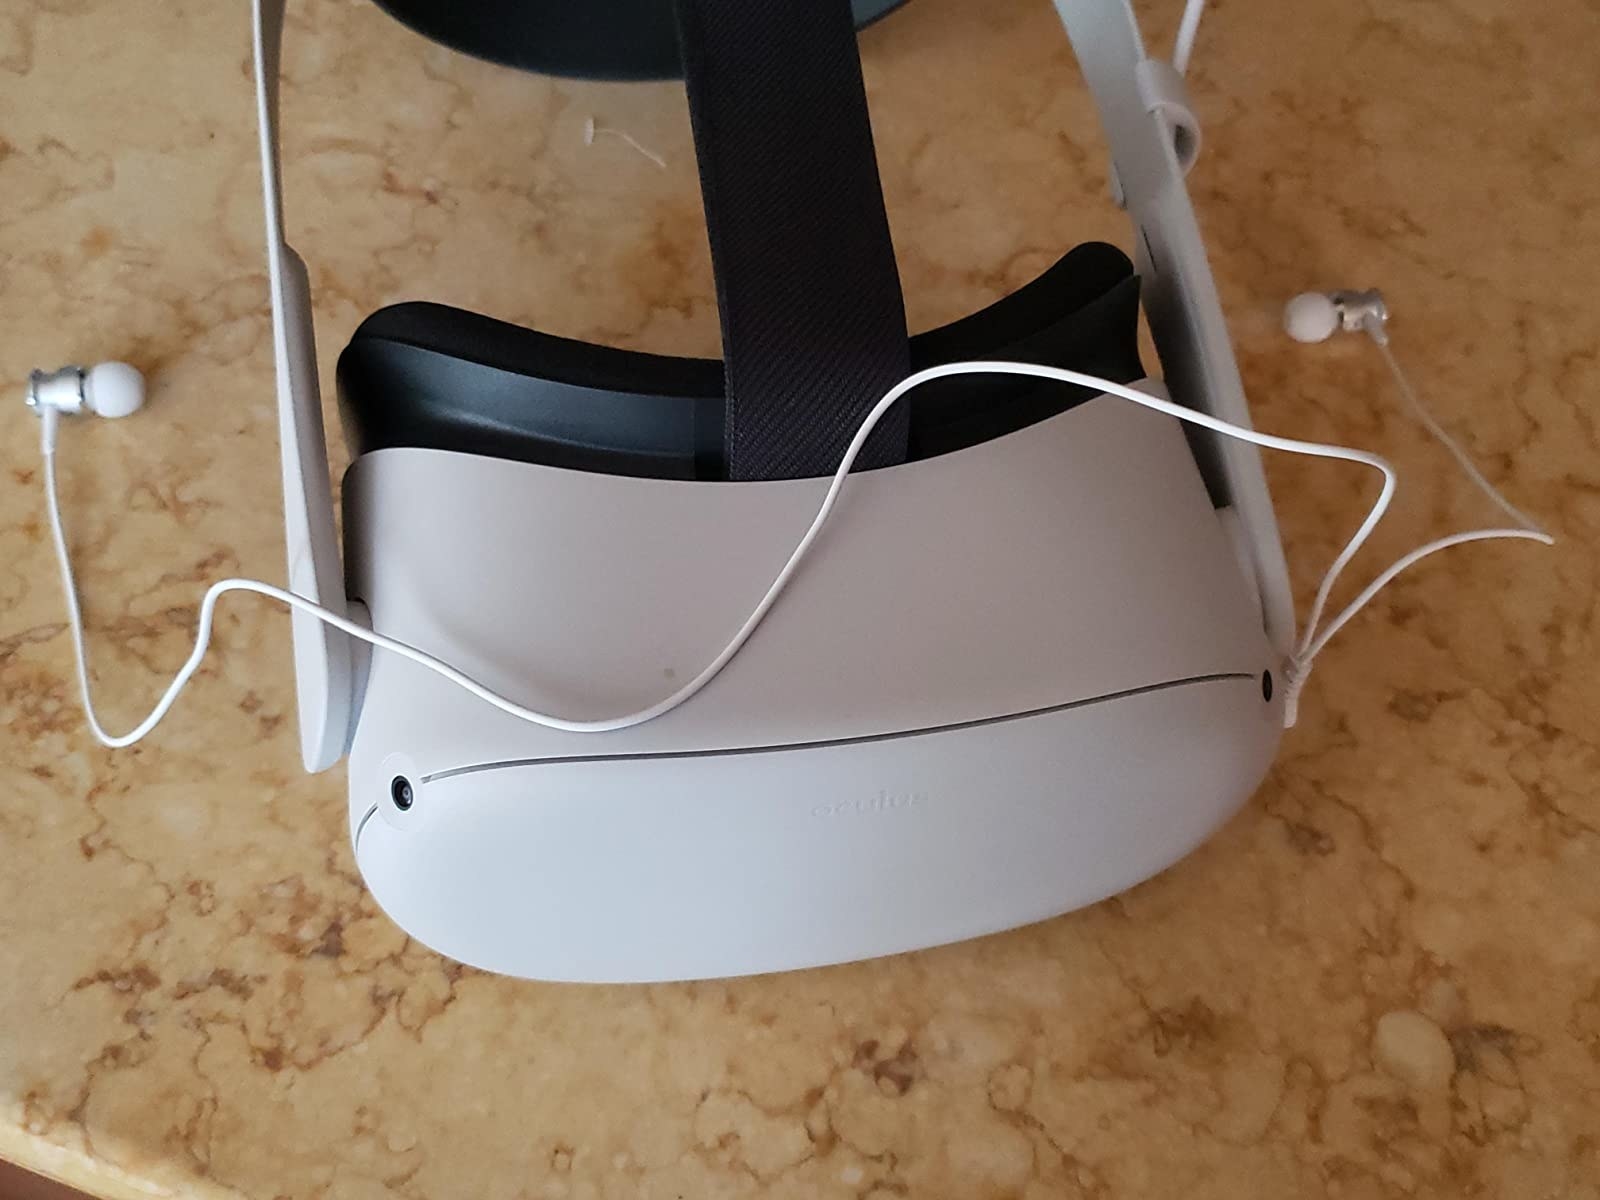 The white earbuds on top of an Oculus Quest 2